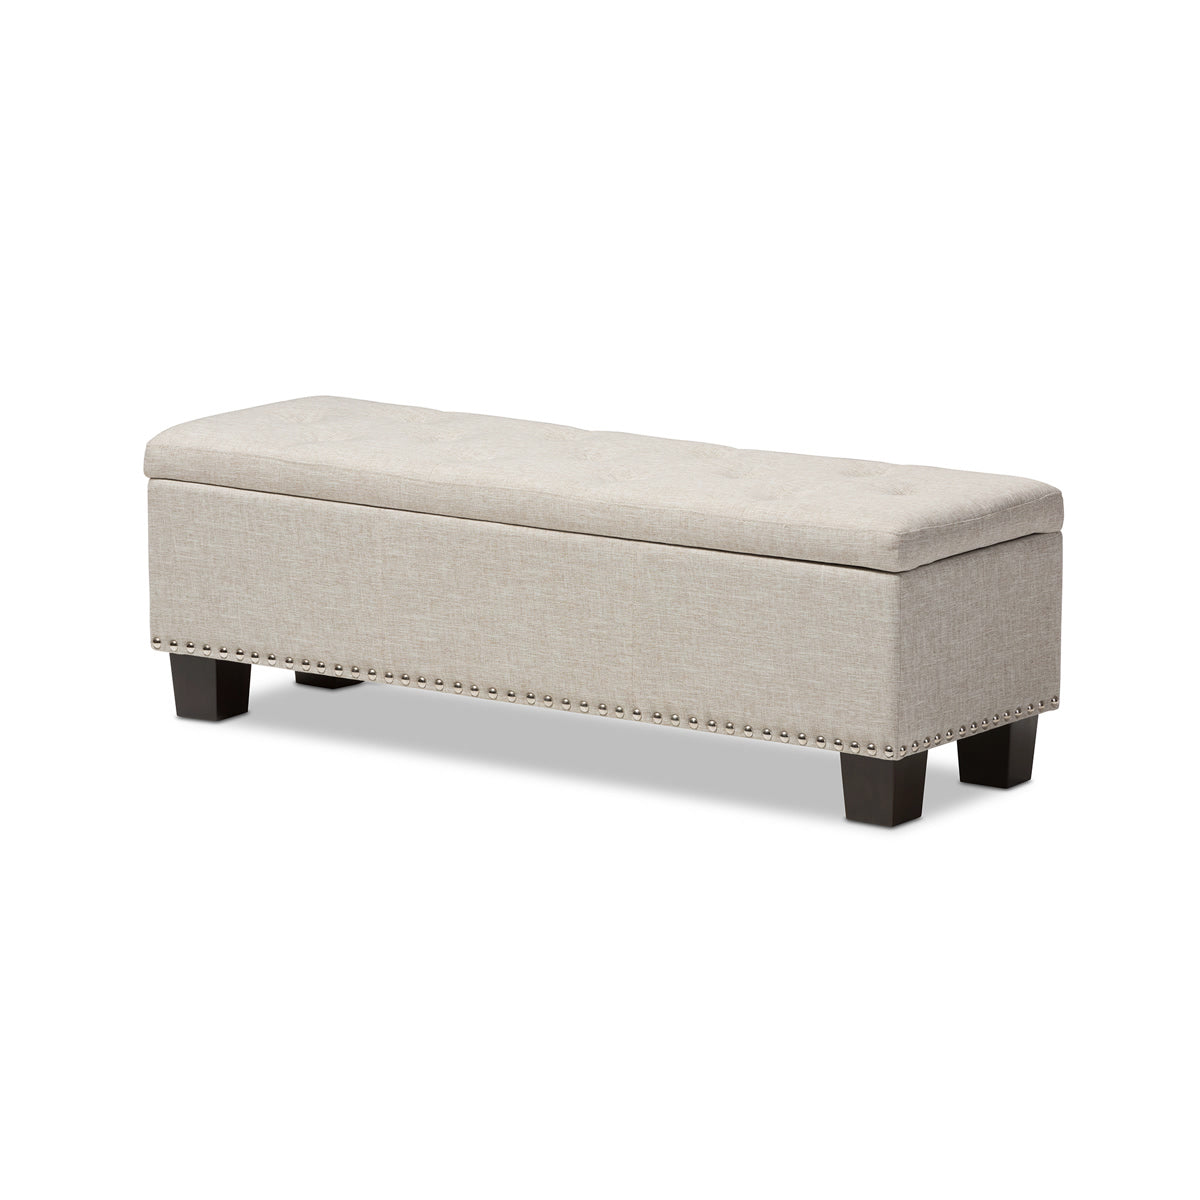 Baxton Studio Hannah Modern and Contemporary Beige Fabric Upholstered Button-Tufting Storage Ottoman Bench Baxton Studio-benches-Minimal And Modern - 2